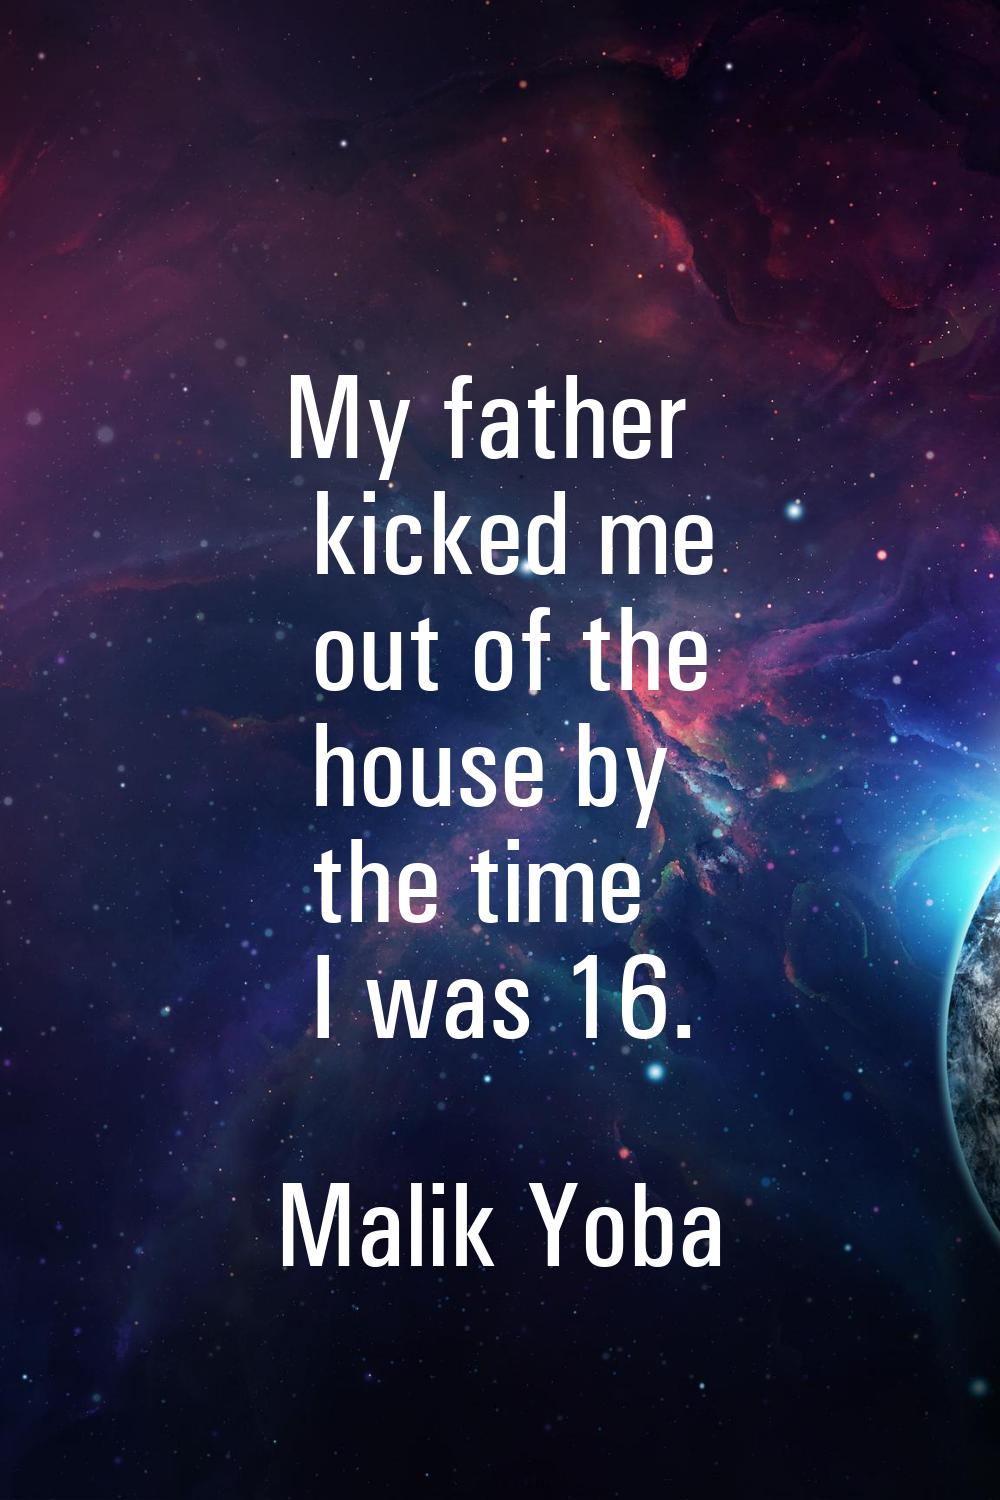 My father kicked me out of the house by the time I was 16.